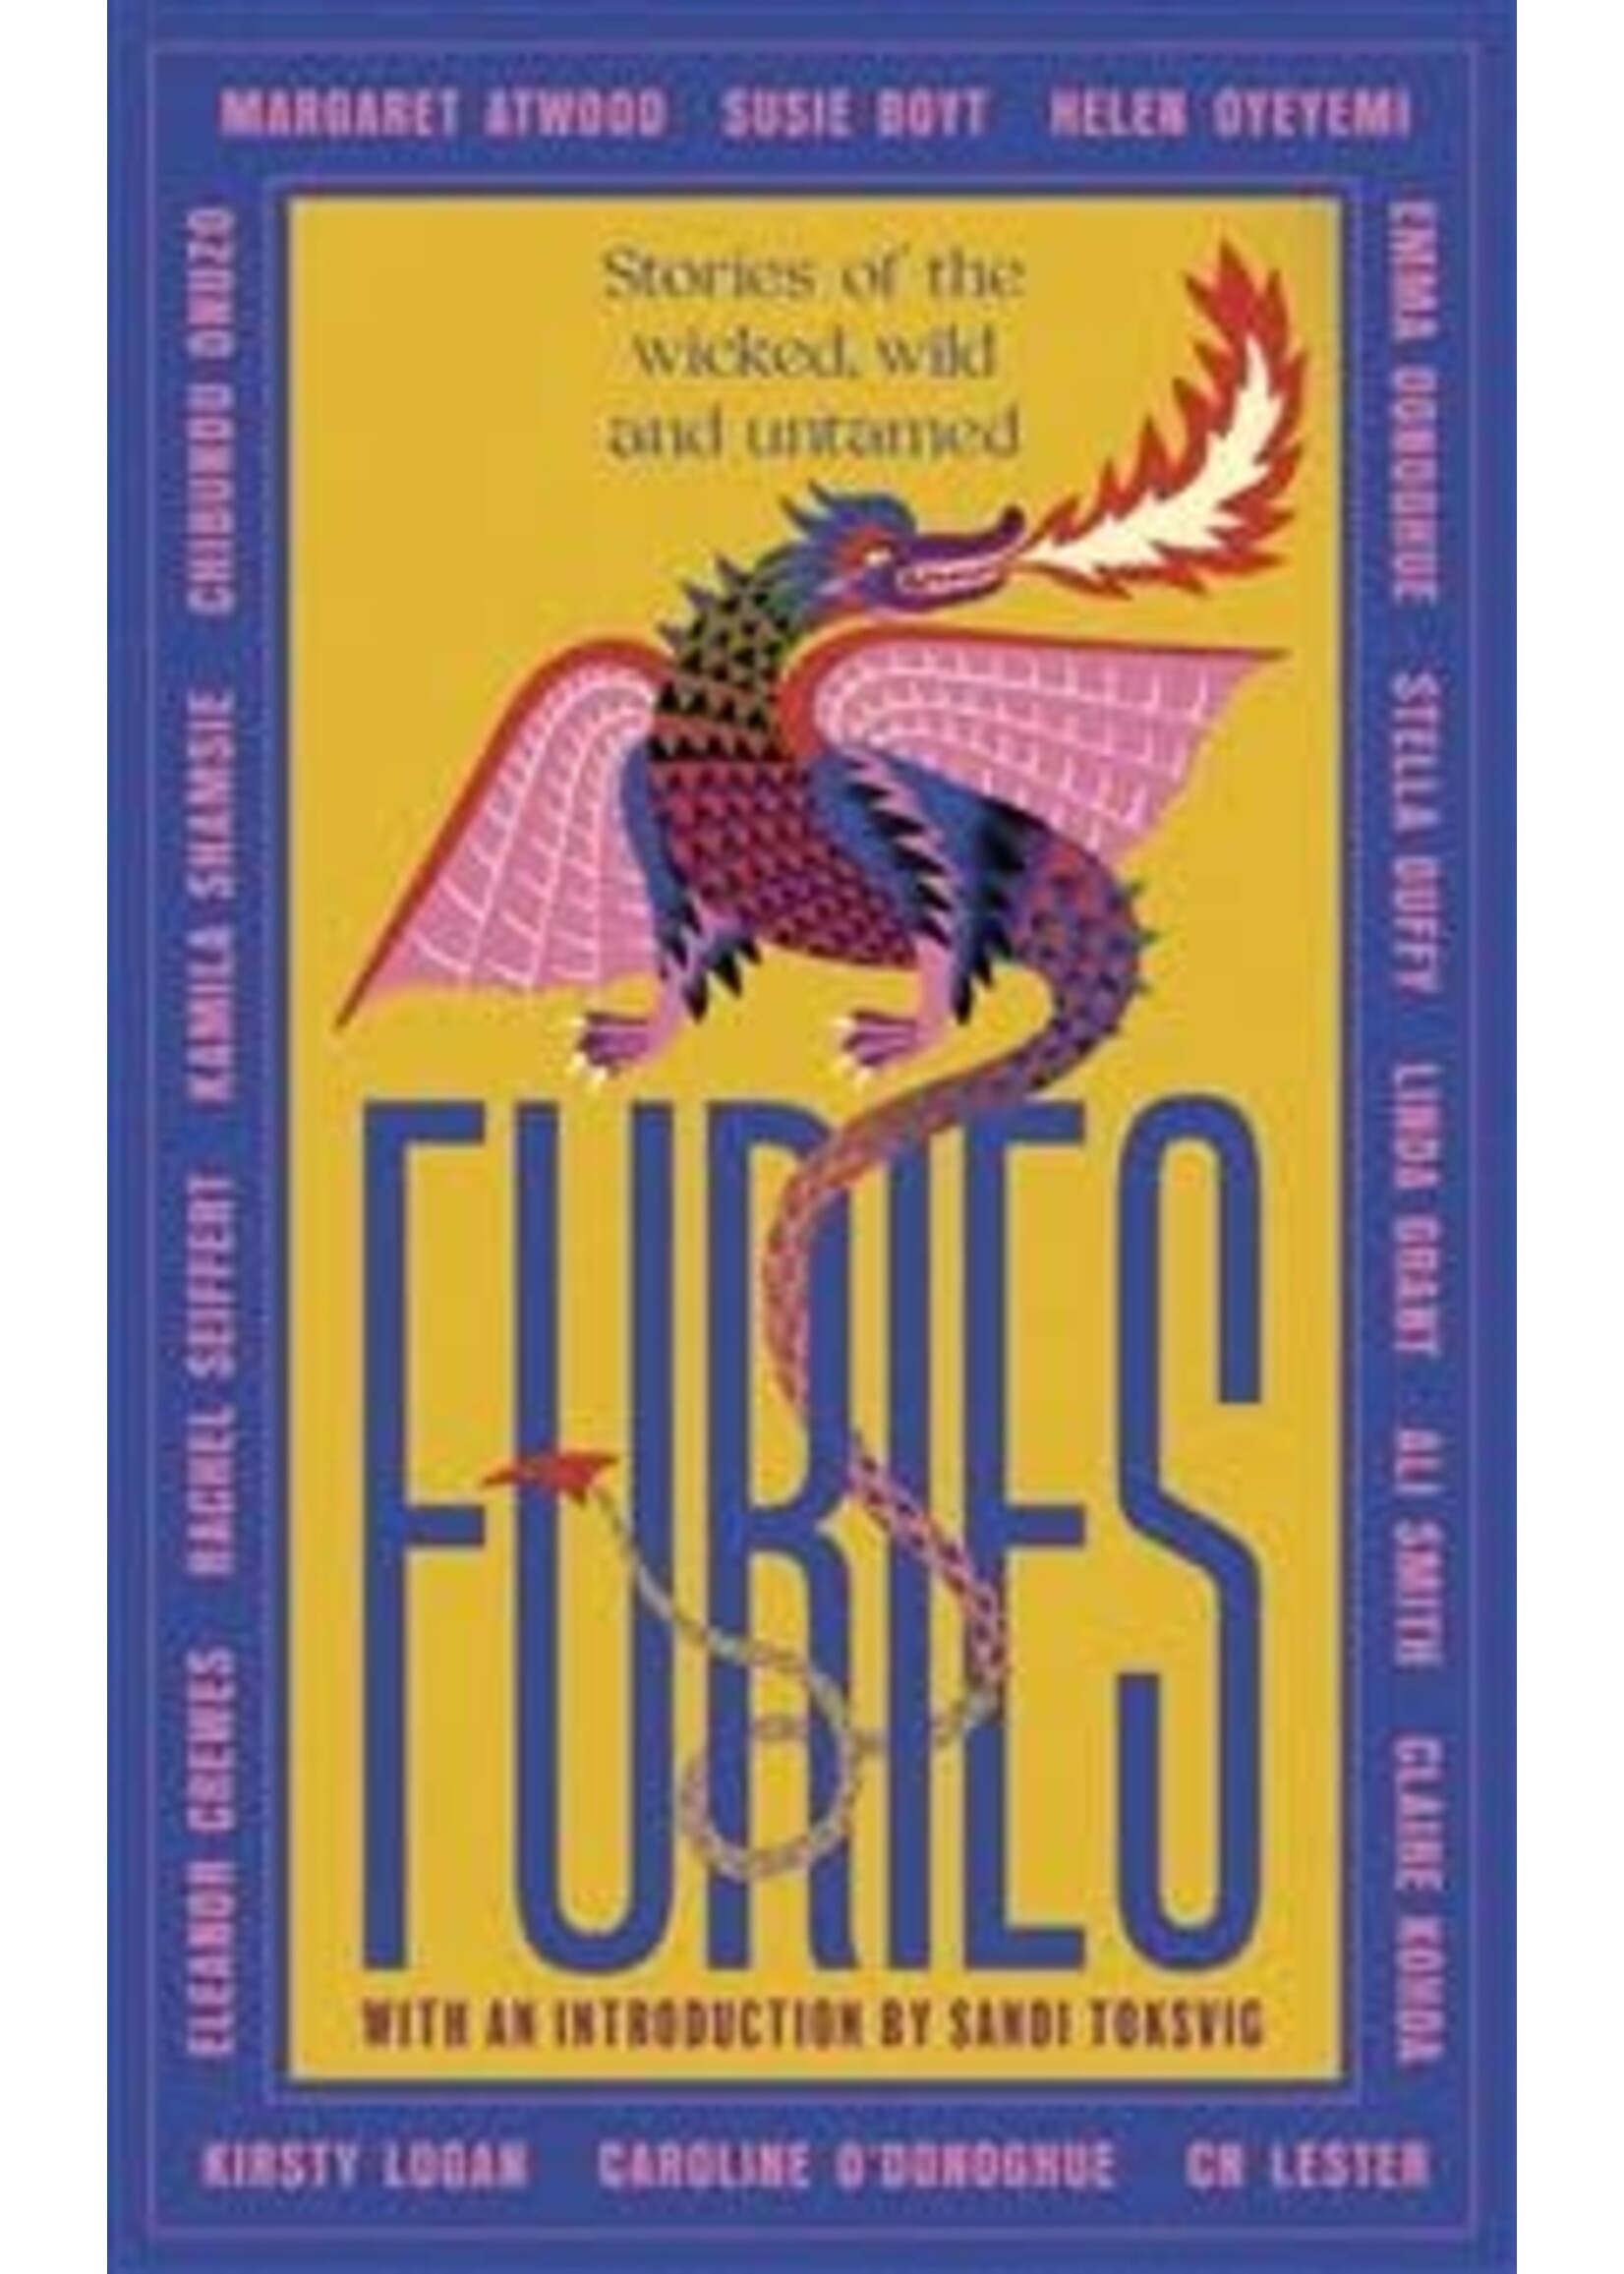 Furies: Stories of the wicked, wild and untamed by Margaret Atwood